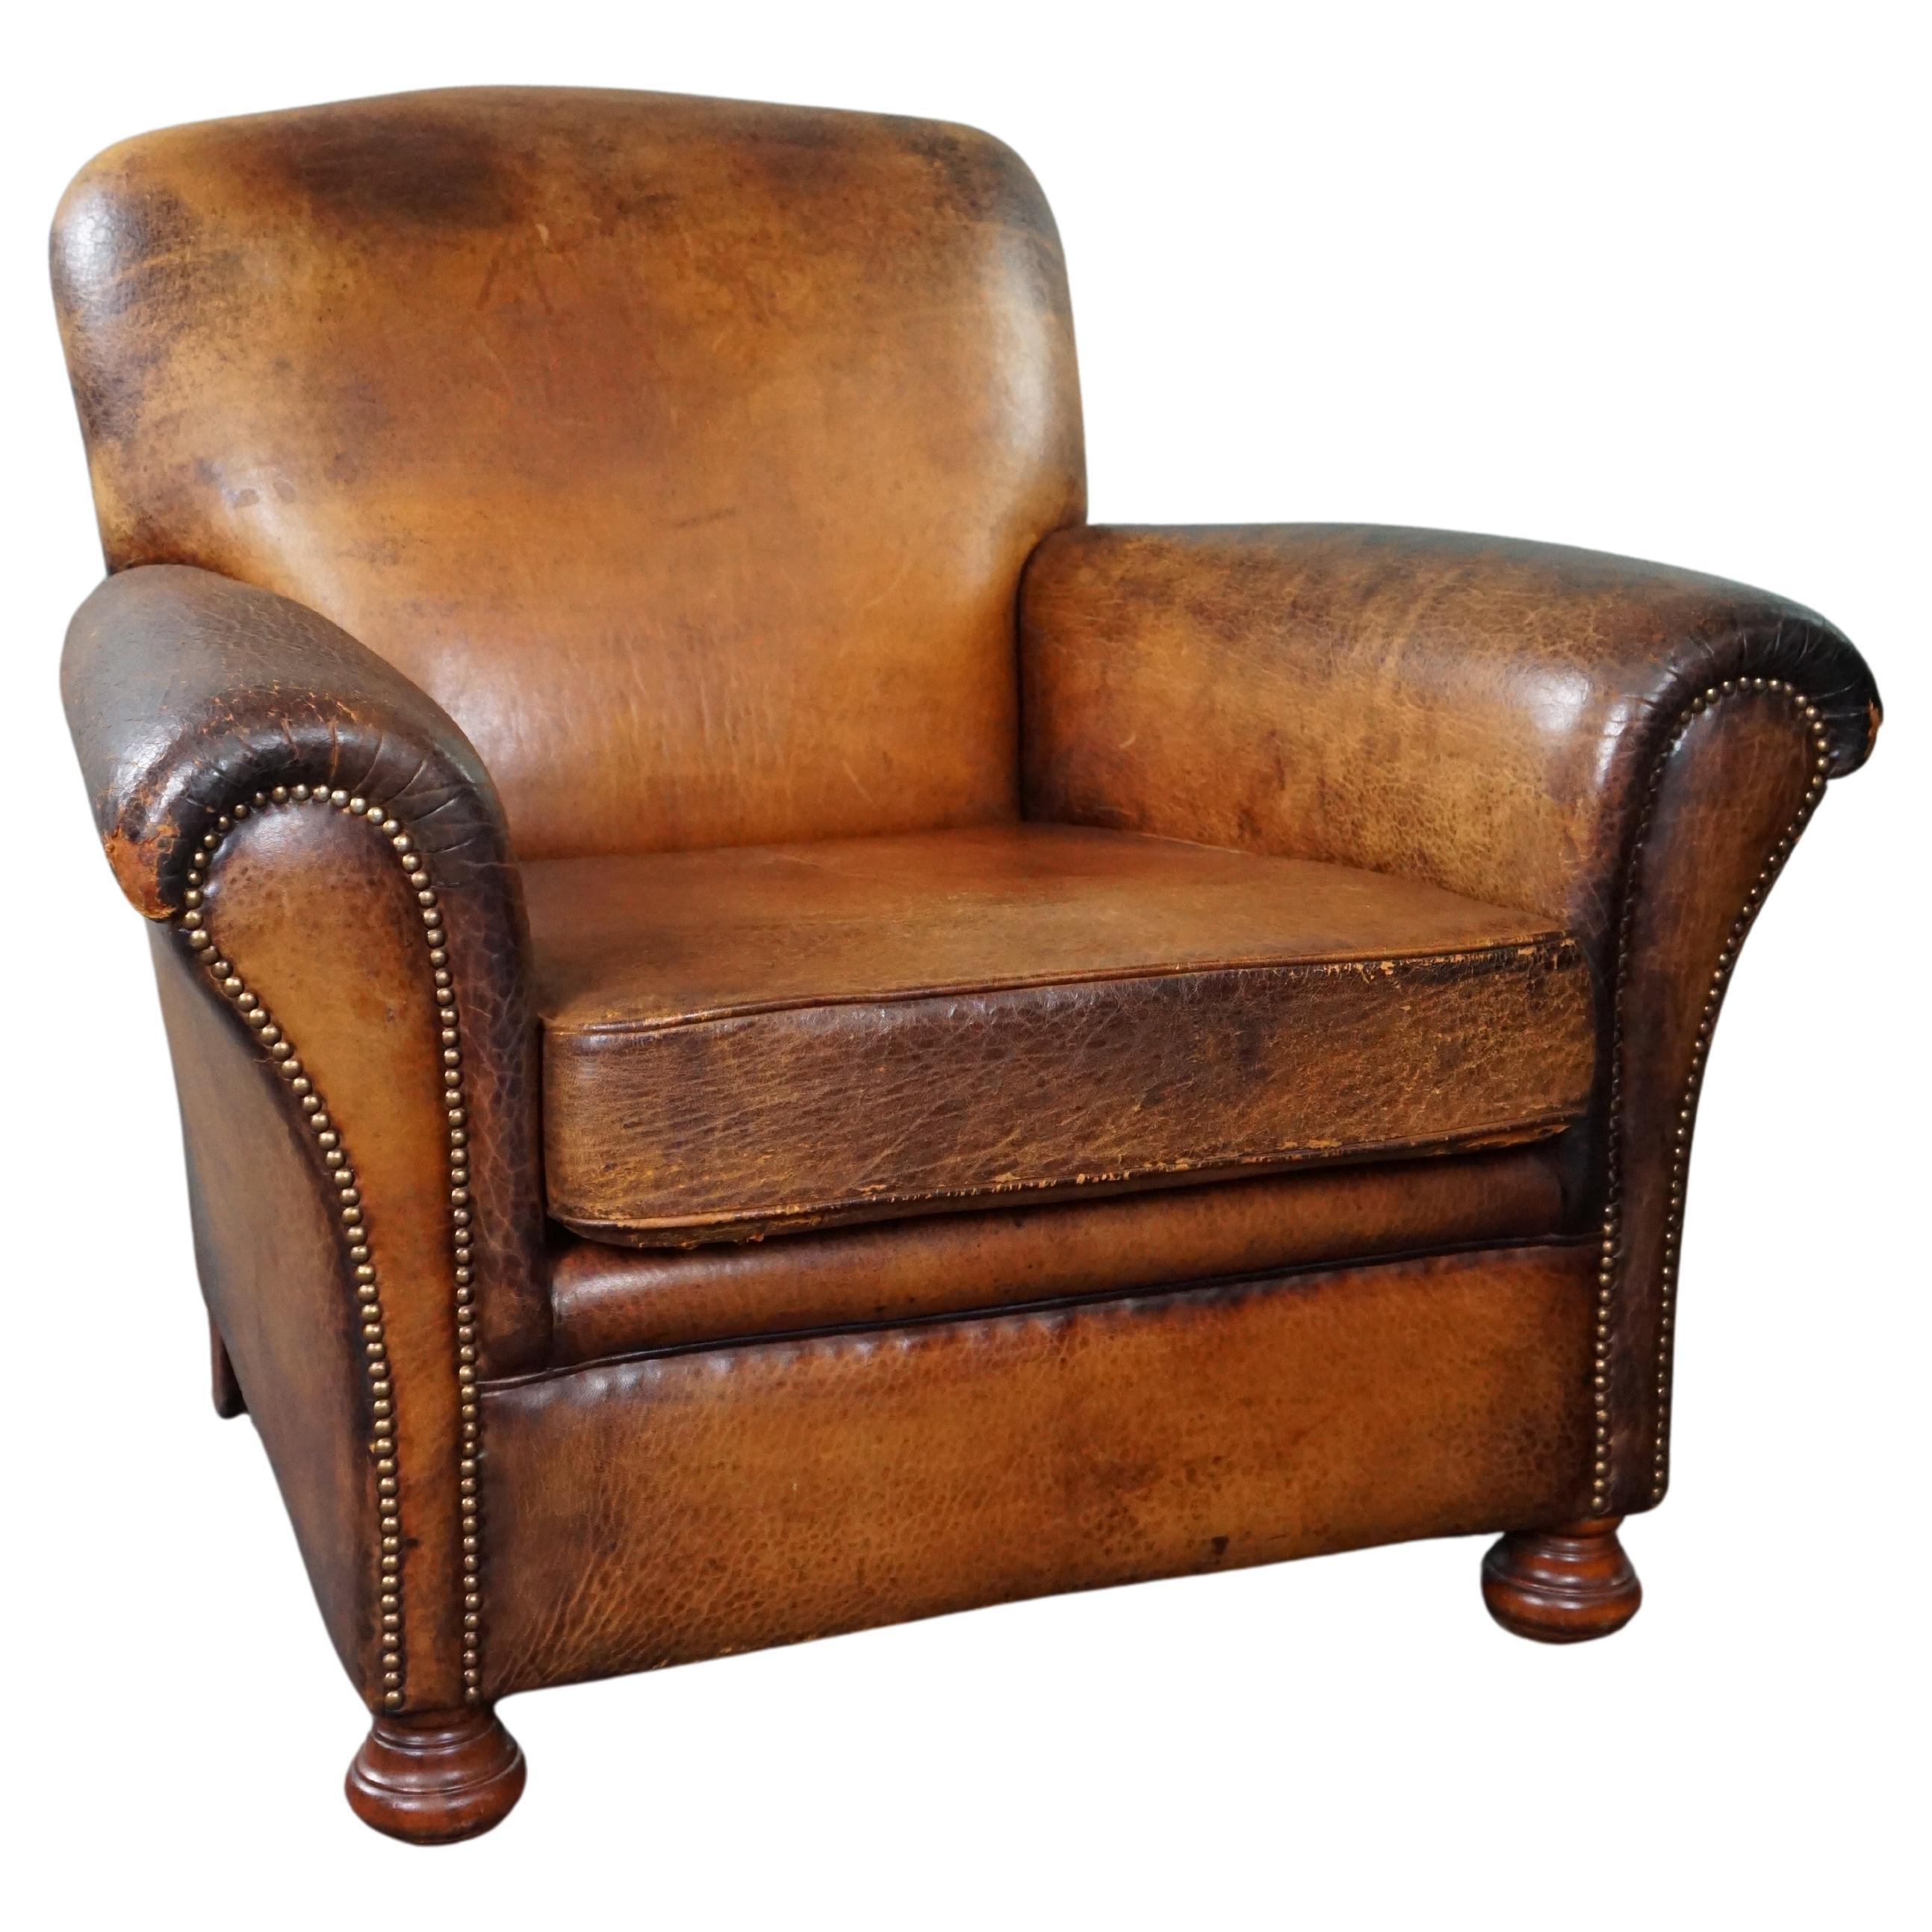 Characteristic sheep leather armchair with amazing colors